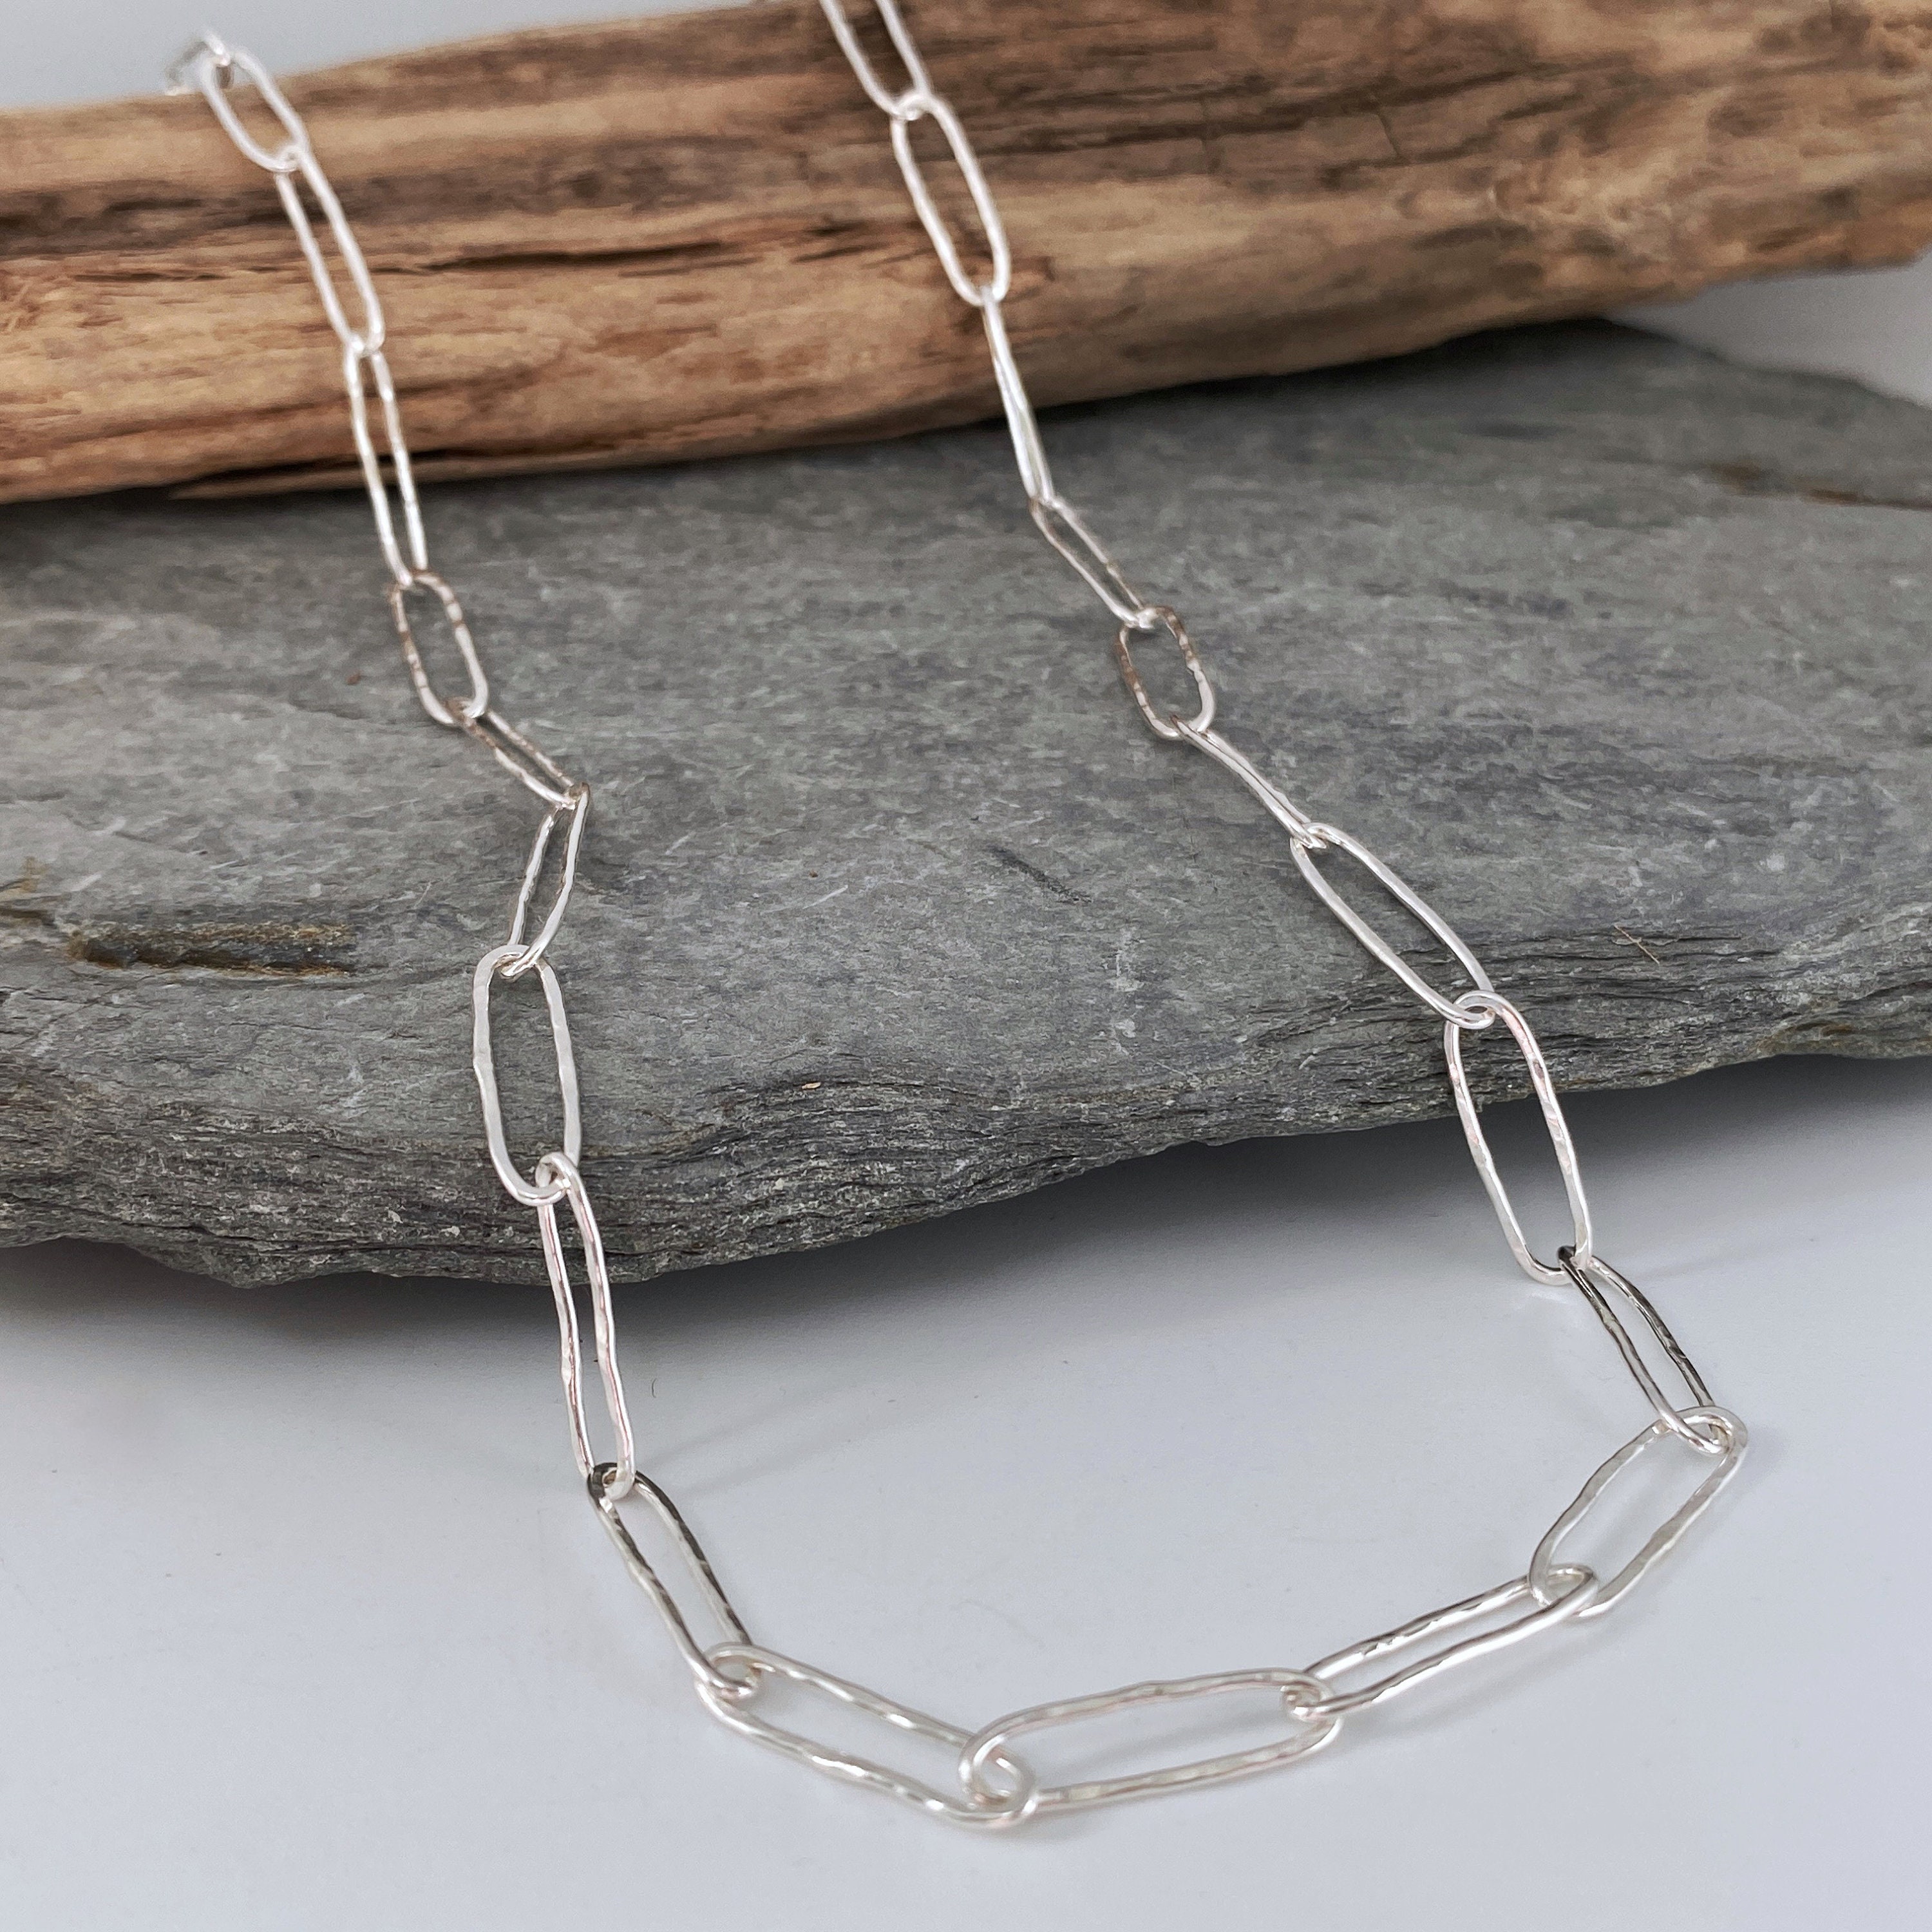 Handmade Silver Chain With Paperclip Links, Necklace